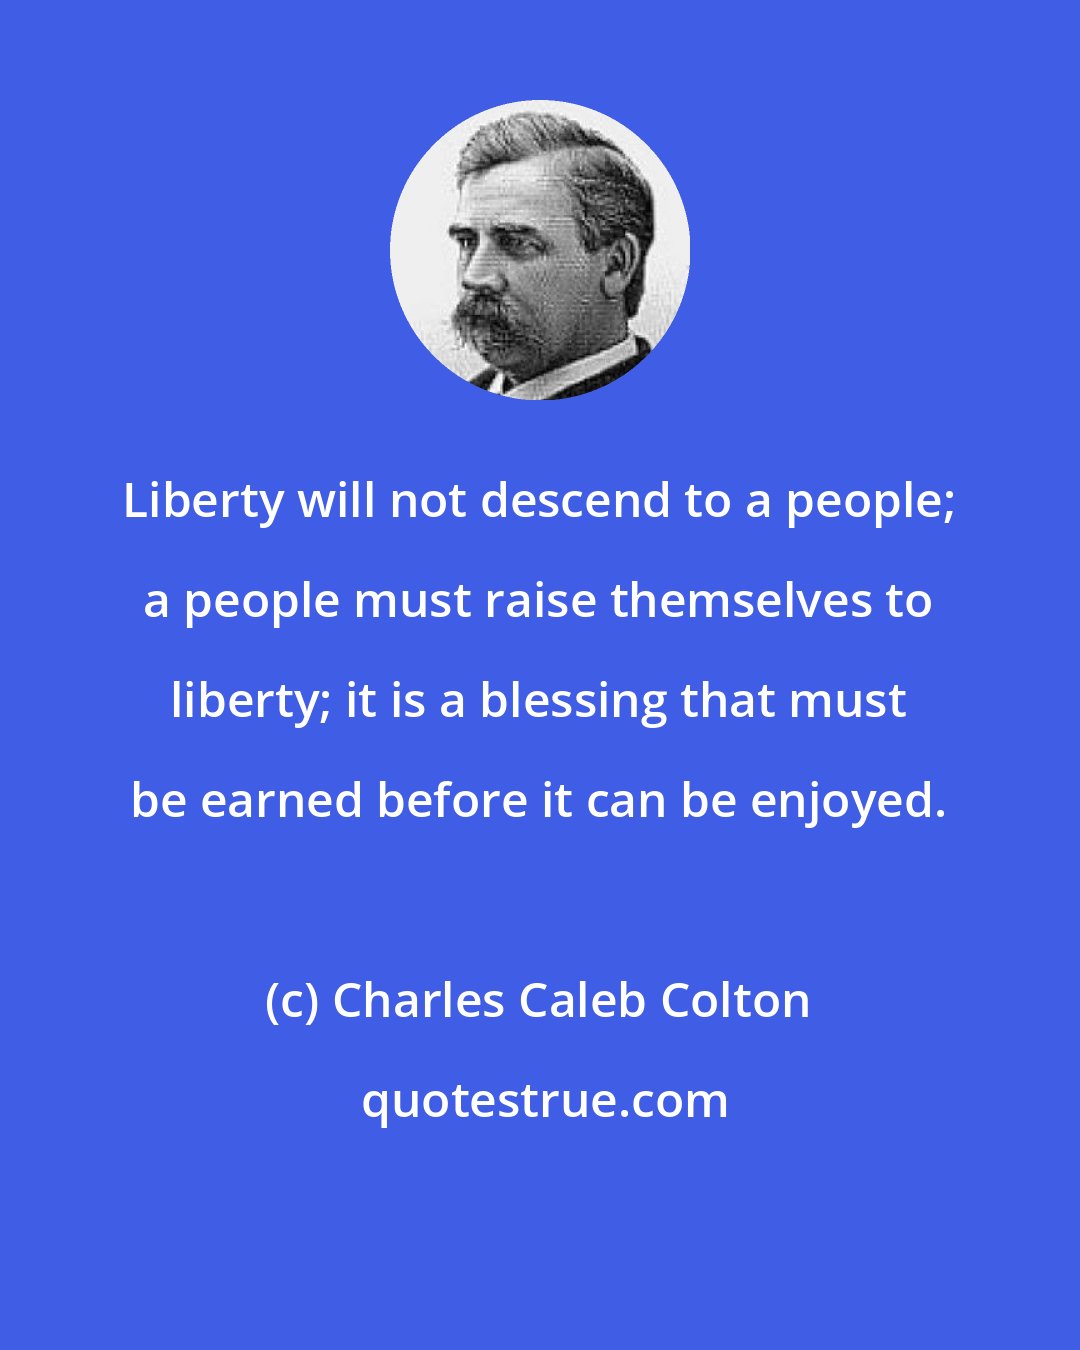 Charles Caleb Colton: Liberty will not descend to a people; a people must raise themselves to liberty; it is a blessing that must be earned before it can be enjoyed.